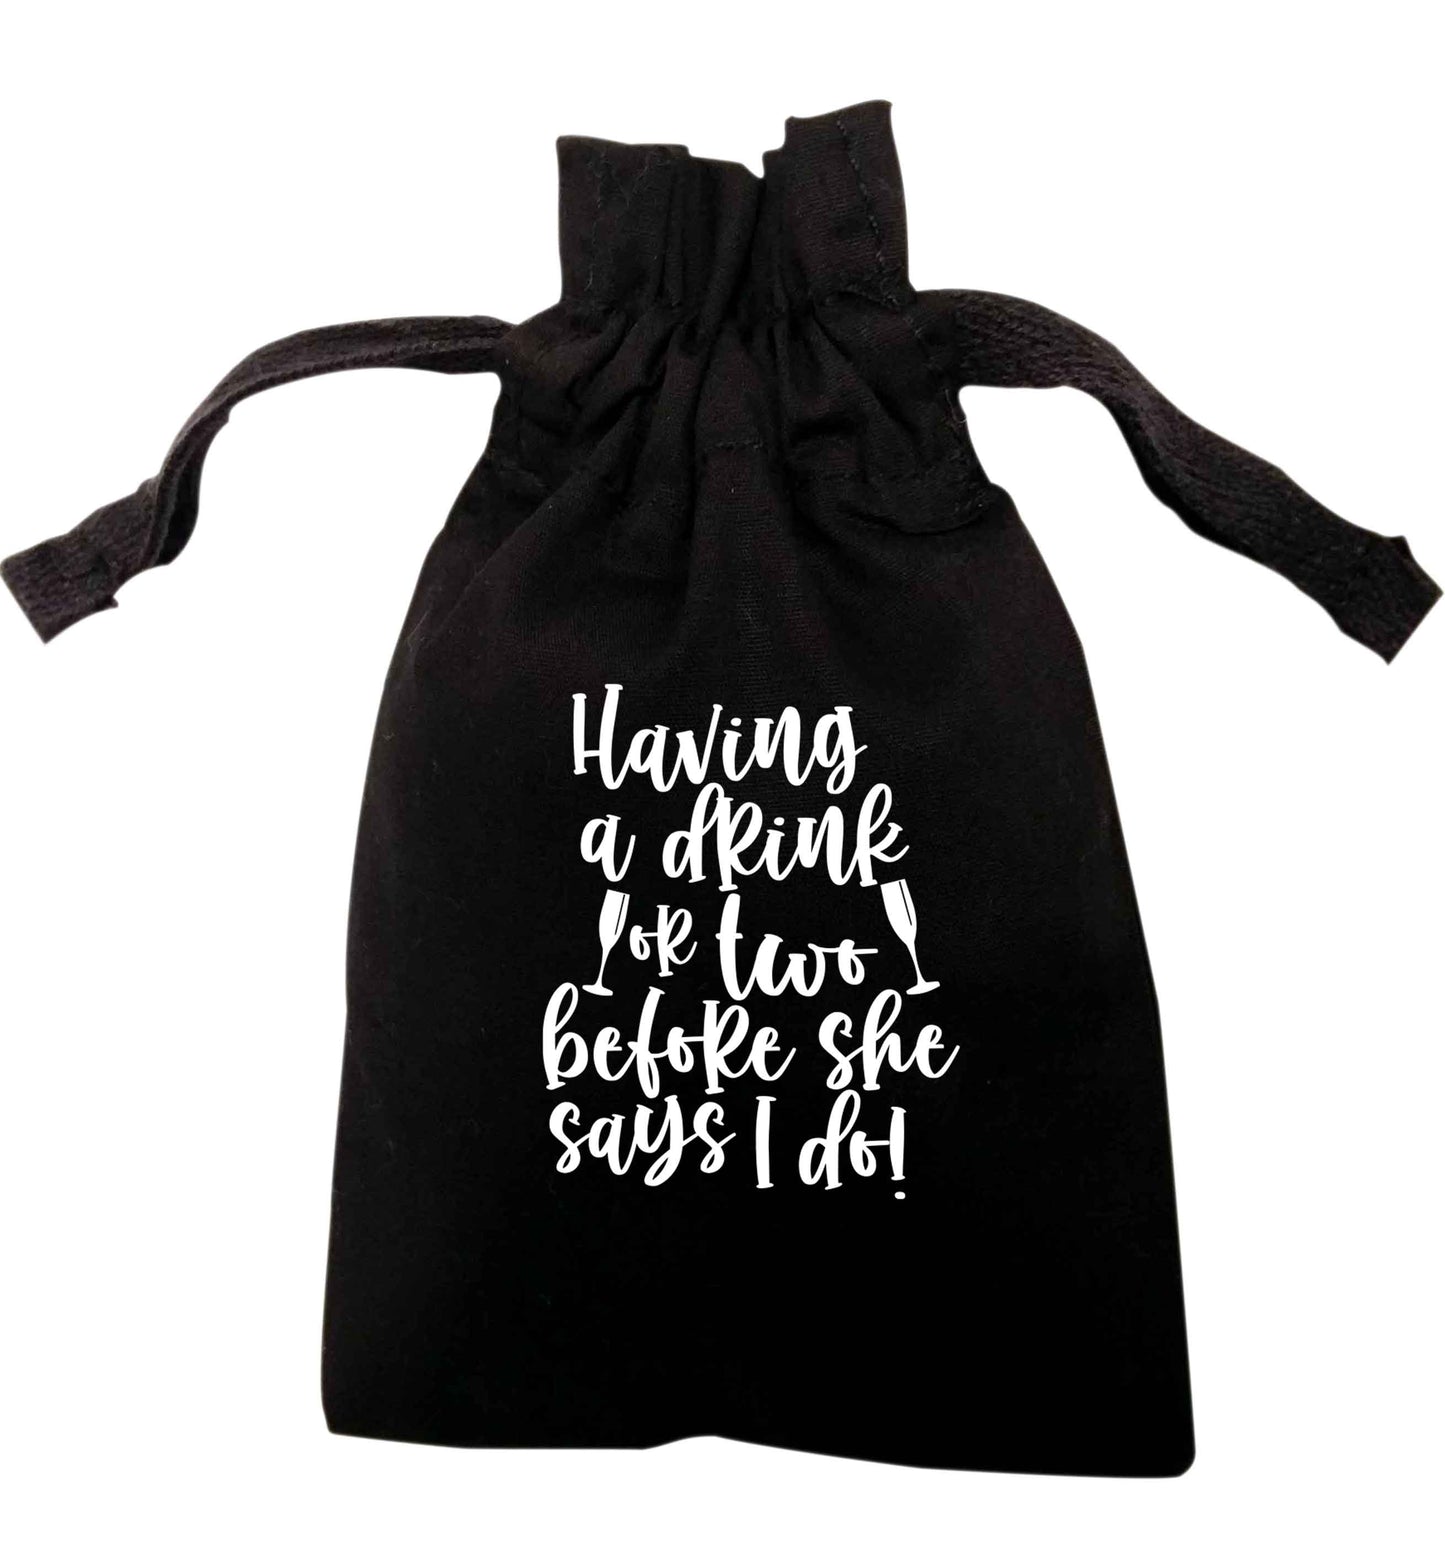 Having a drink or two before she says I do | XS - L | Pouch / Drawstring bag / Sack | Organic Cotton | Bulk discounts available!